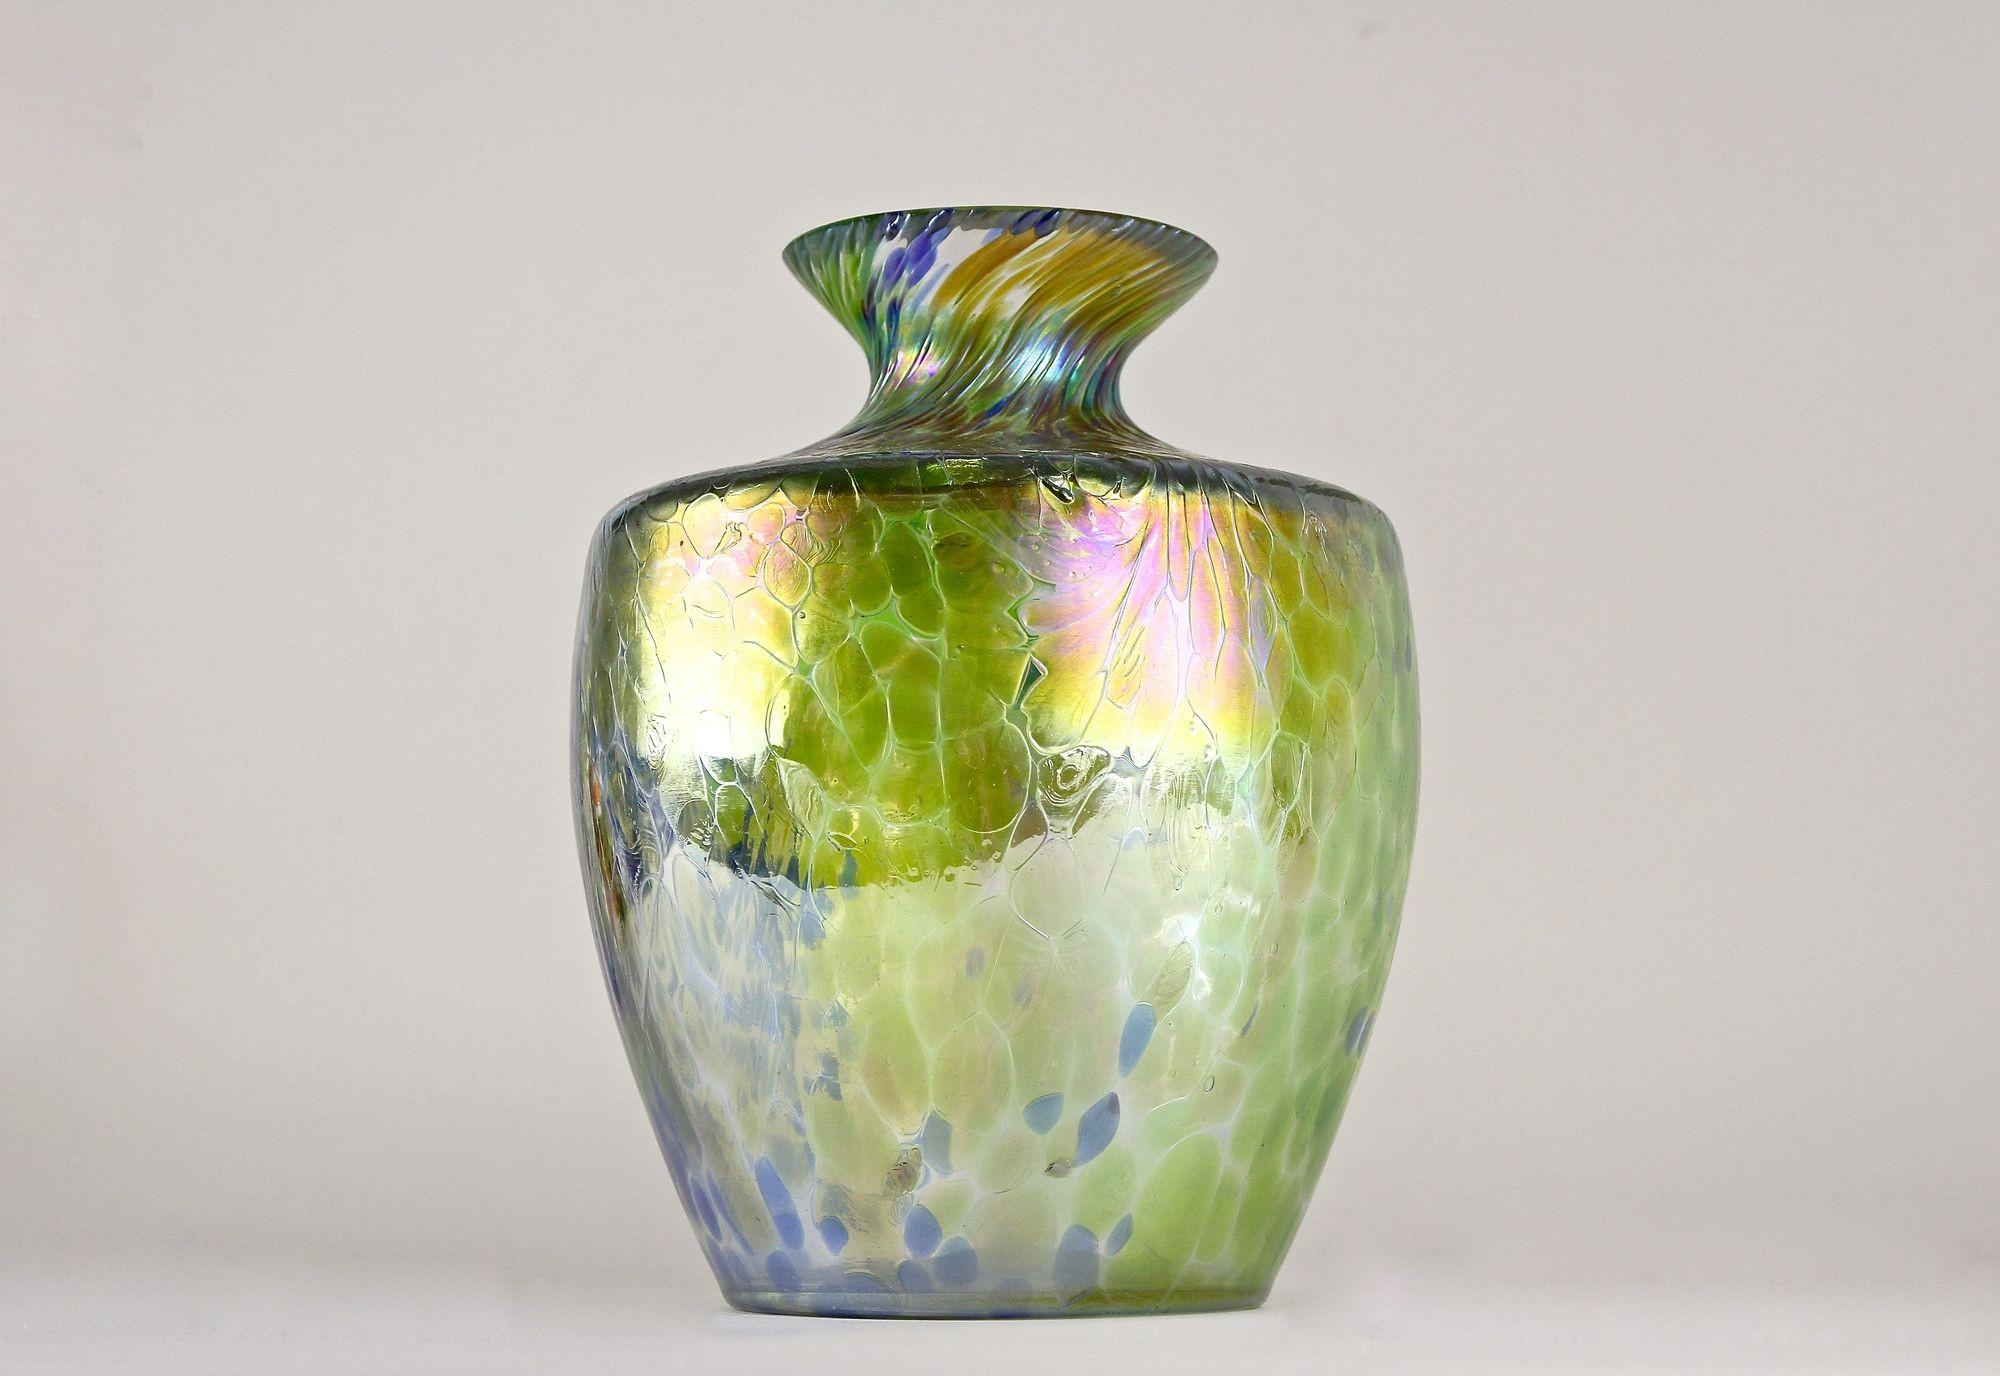 Iridescent Art Nouveau Glass Vase Attributed To Fritz Heckert, Bohemia ca. 1905 For Sale 7